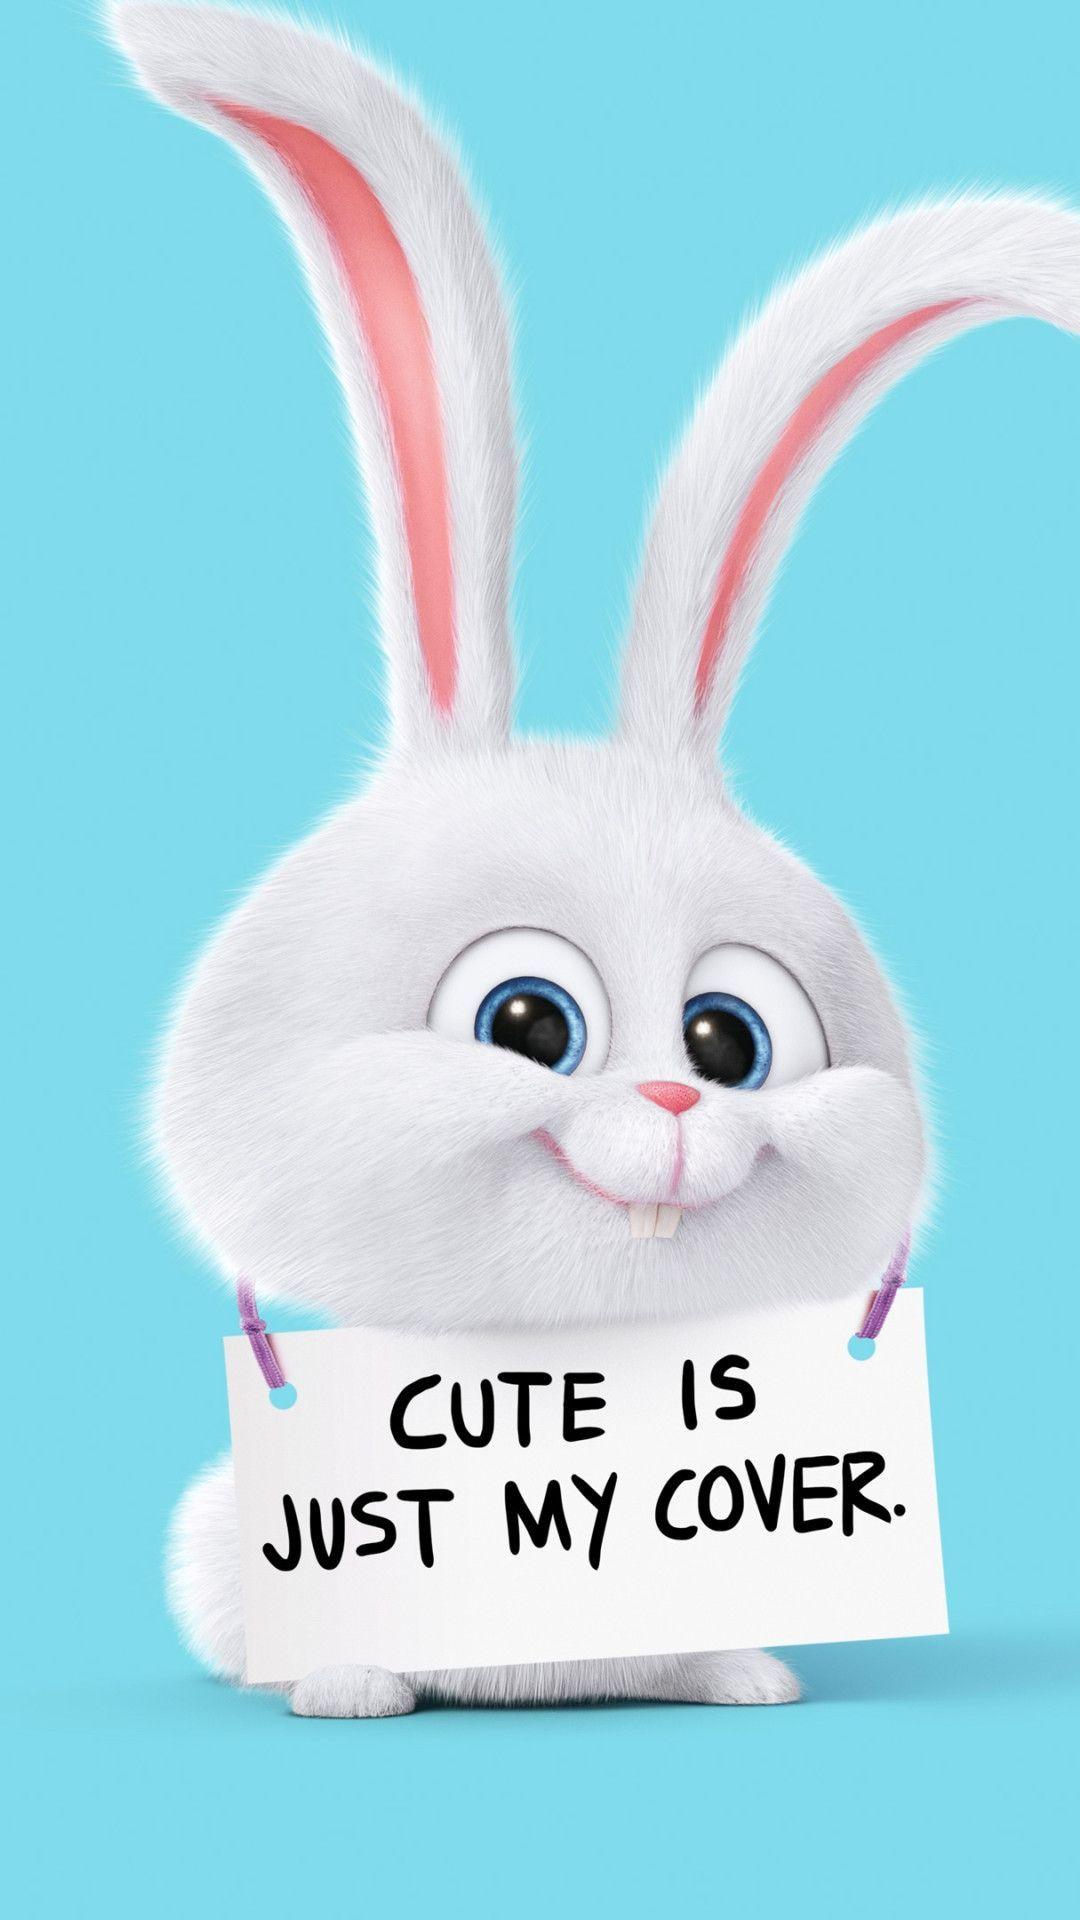 Cute Rabbit Is Just My Cover iPhone HD Wallpaper in 2019